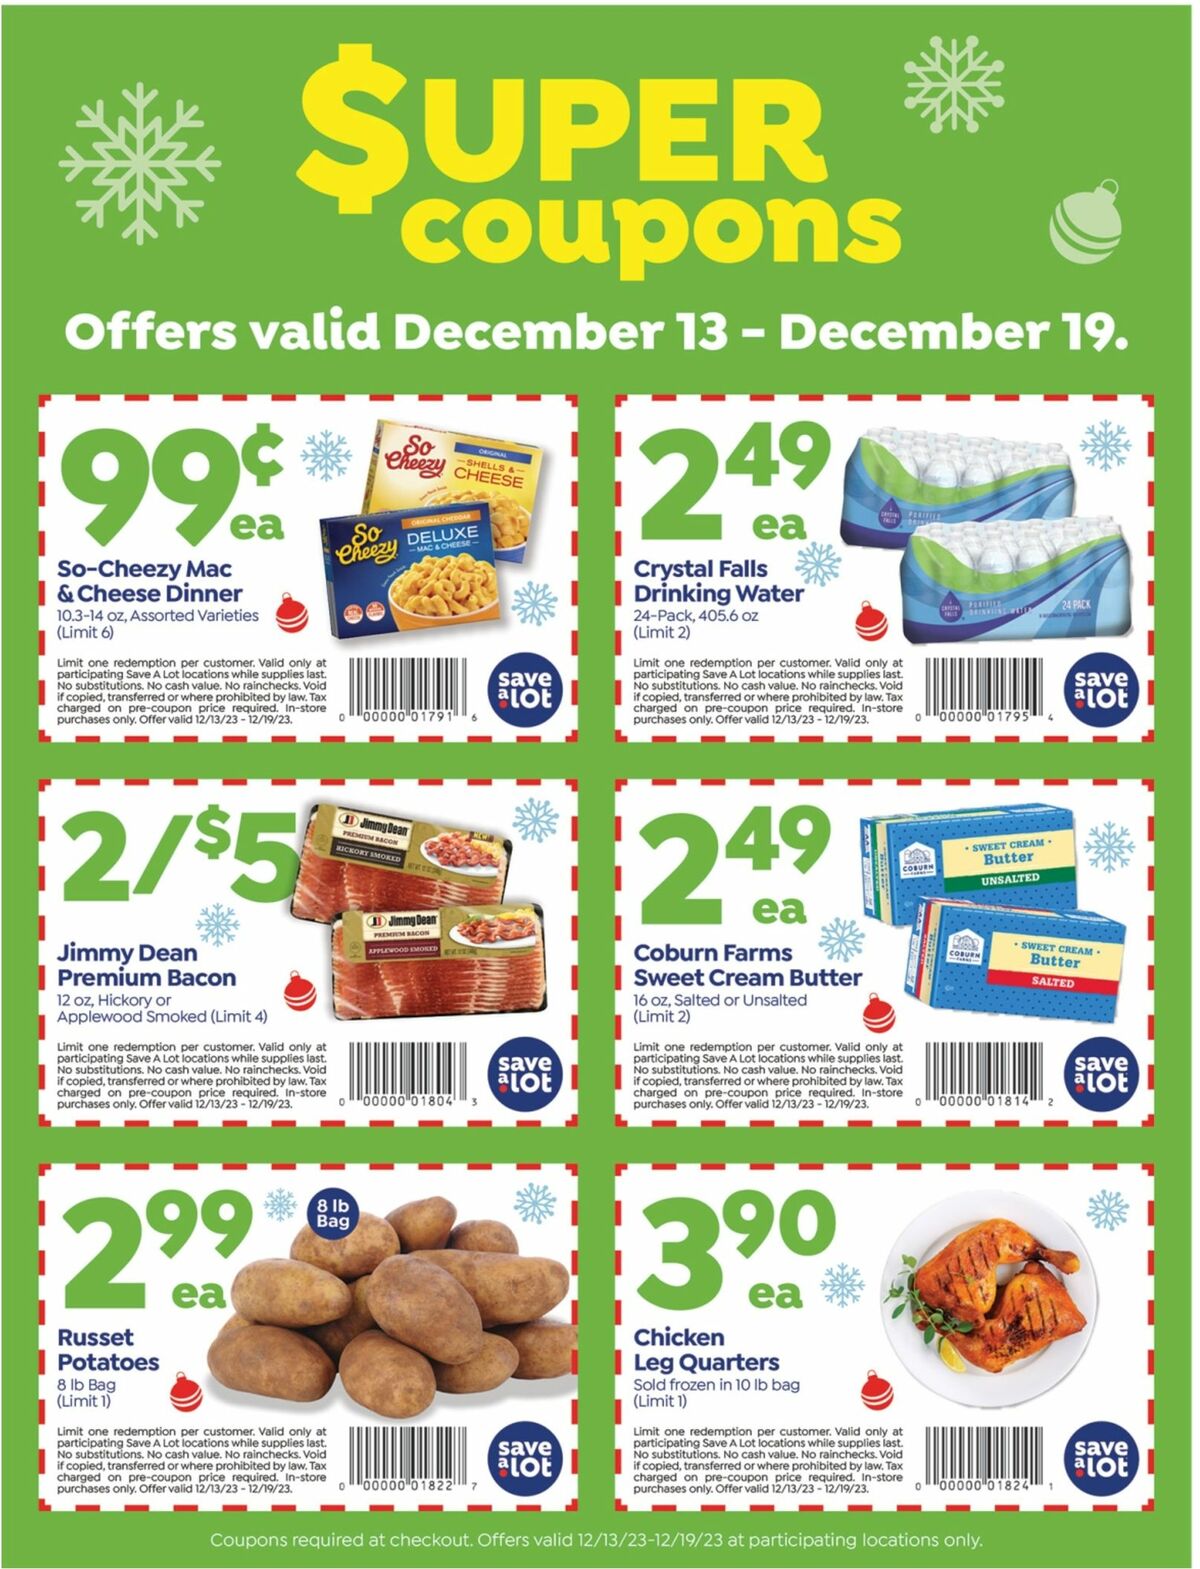 Save A Lot Weekly Ad from December 13